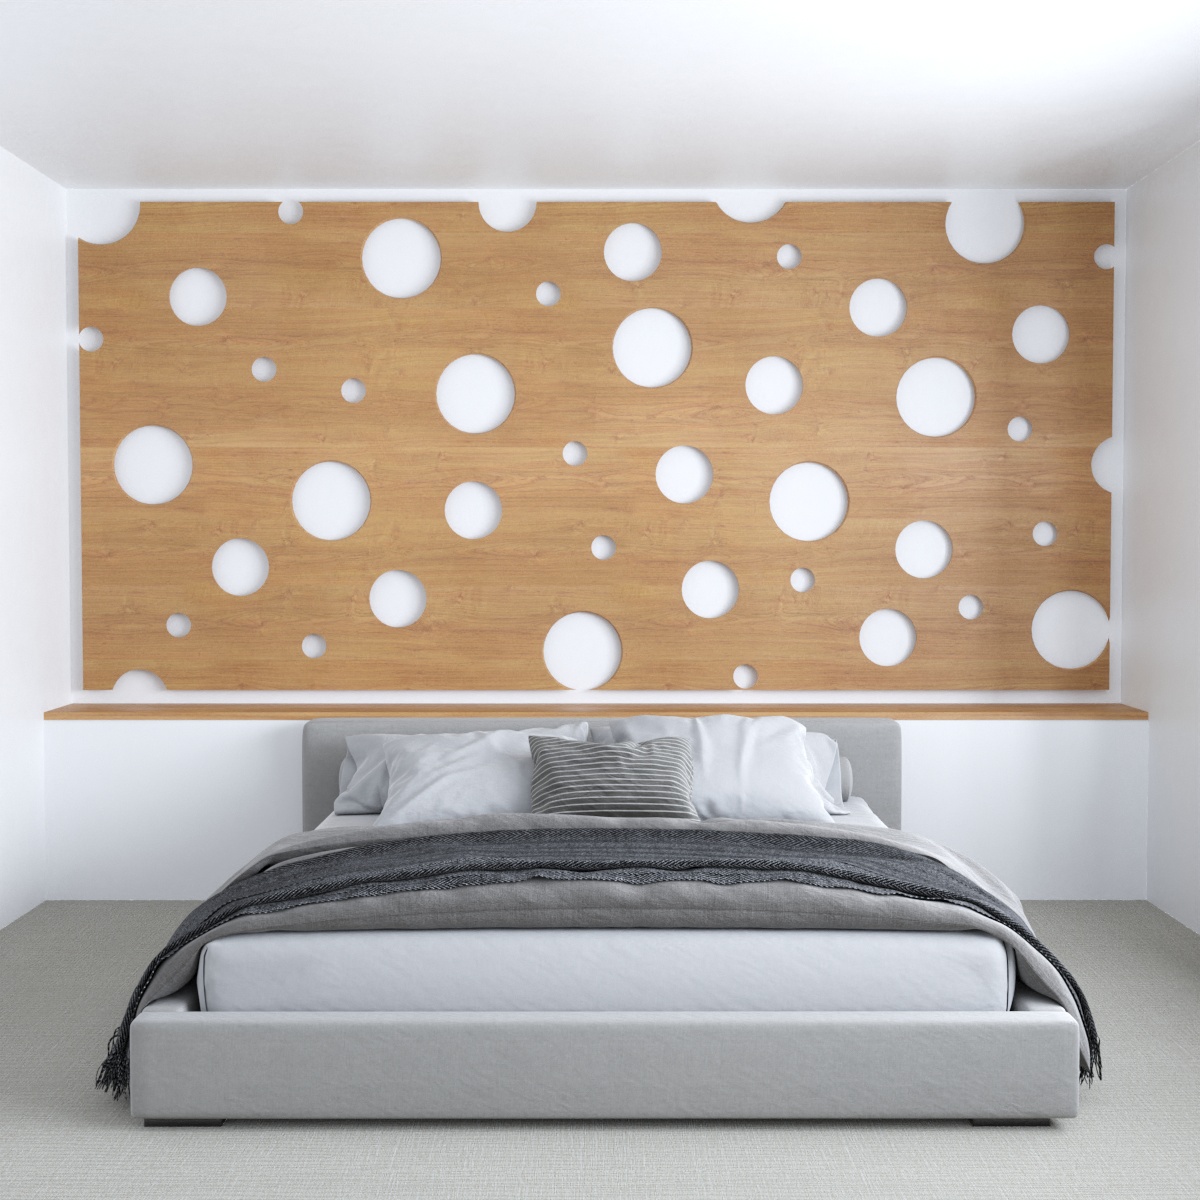 Similar to the holes that can be found in Swiss cheese, this wood accent wall has cut-out circles, adding a whimsical touch to the bedroom.